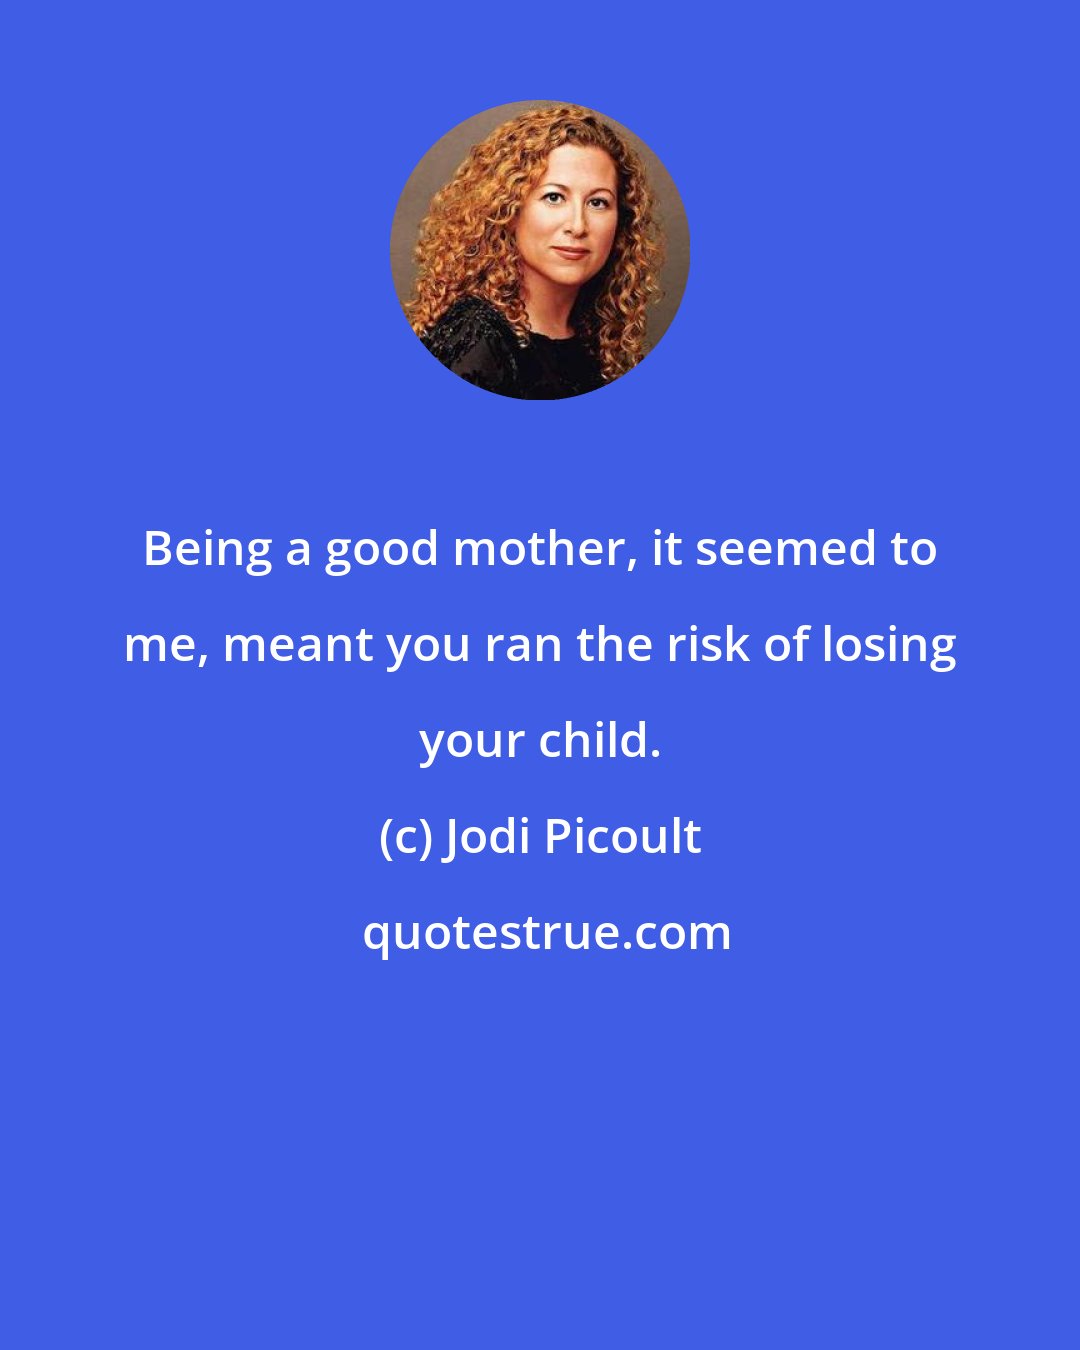 Jodi Picoult: Being a good mother, it seemed to me, meant you ran the risk of losing your child.